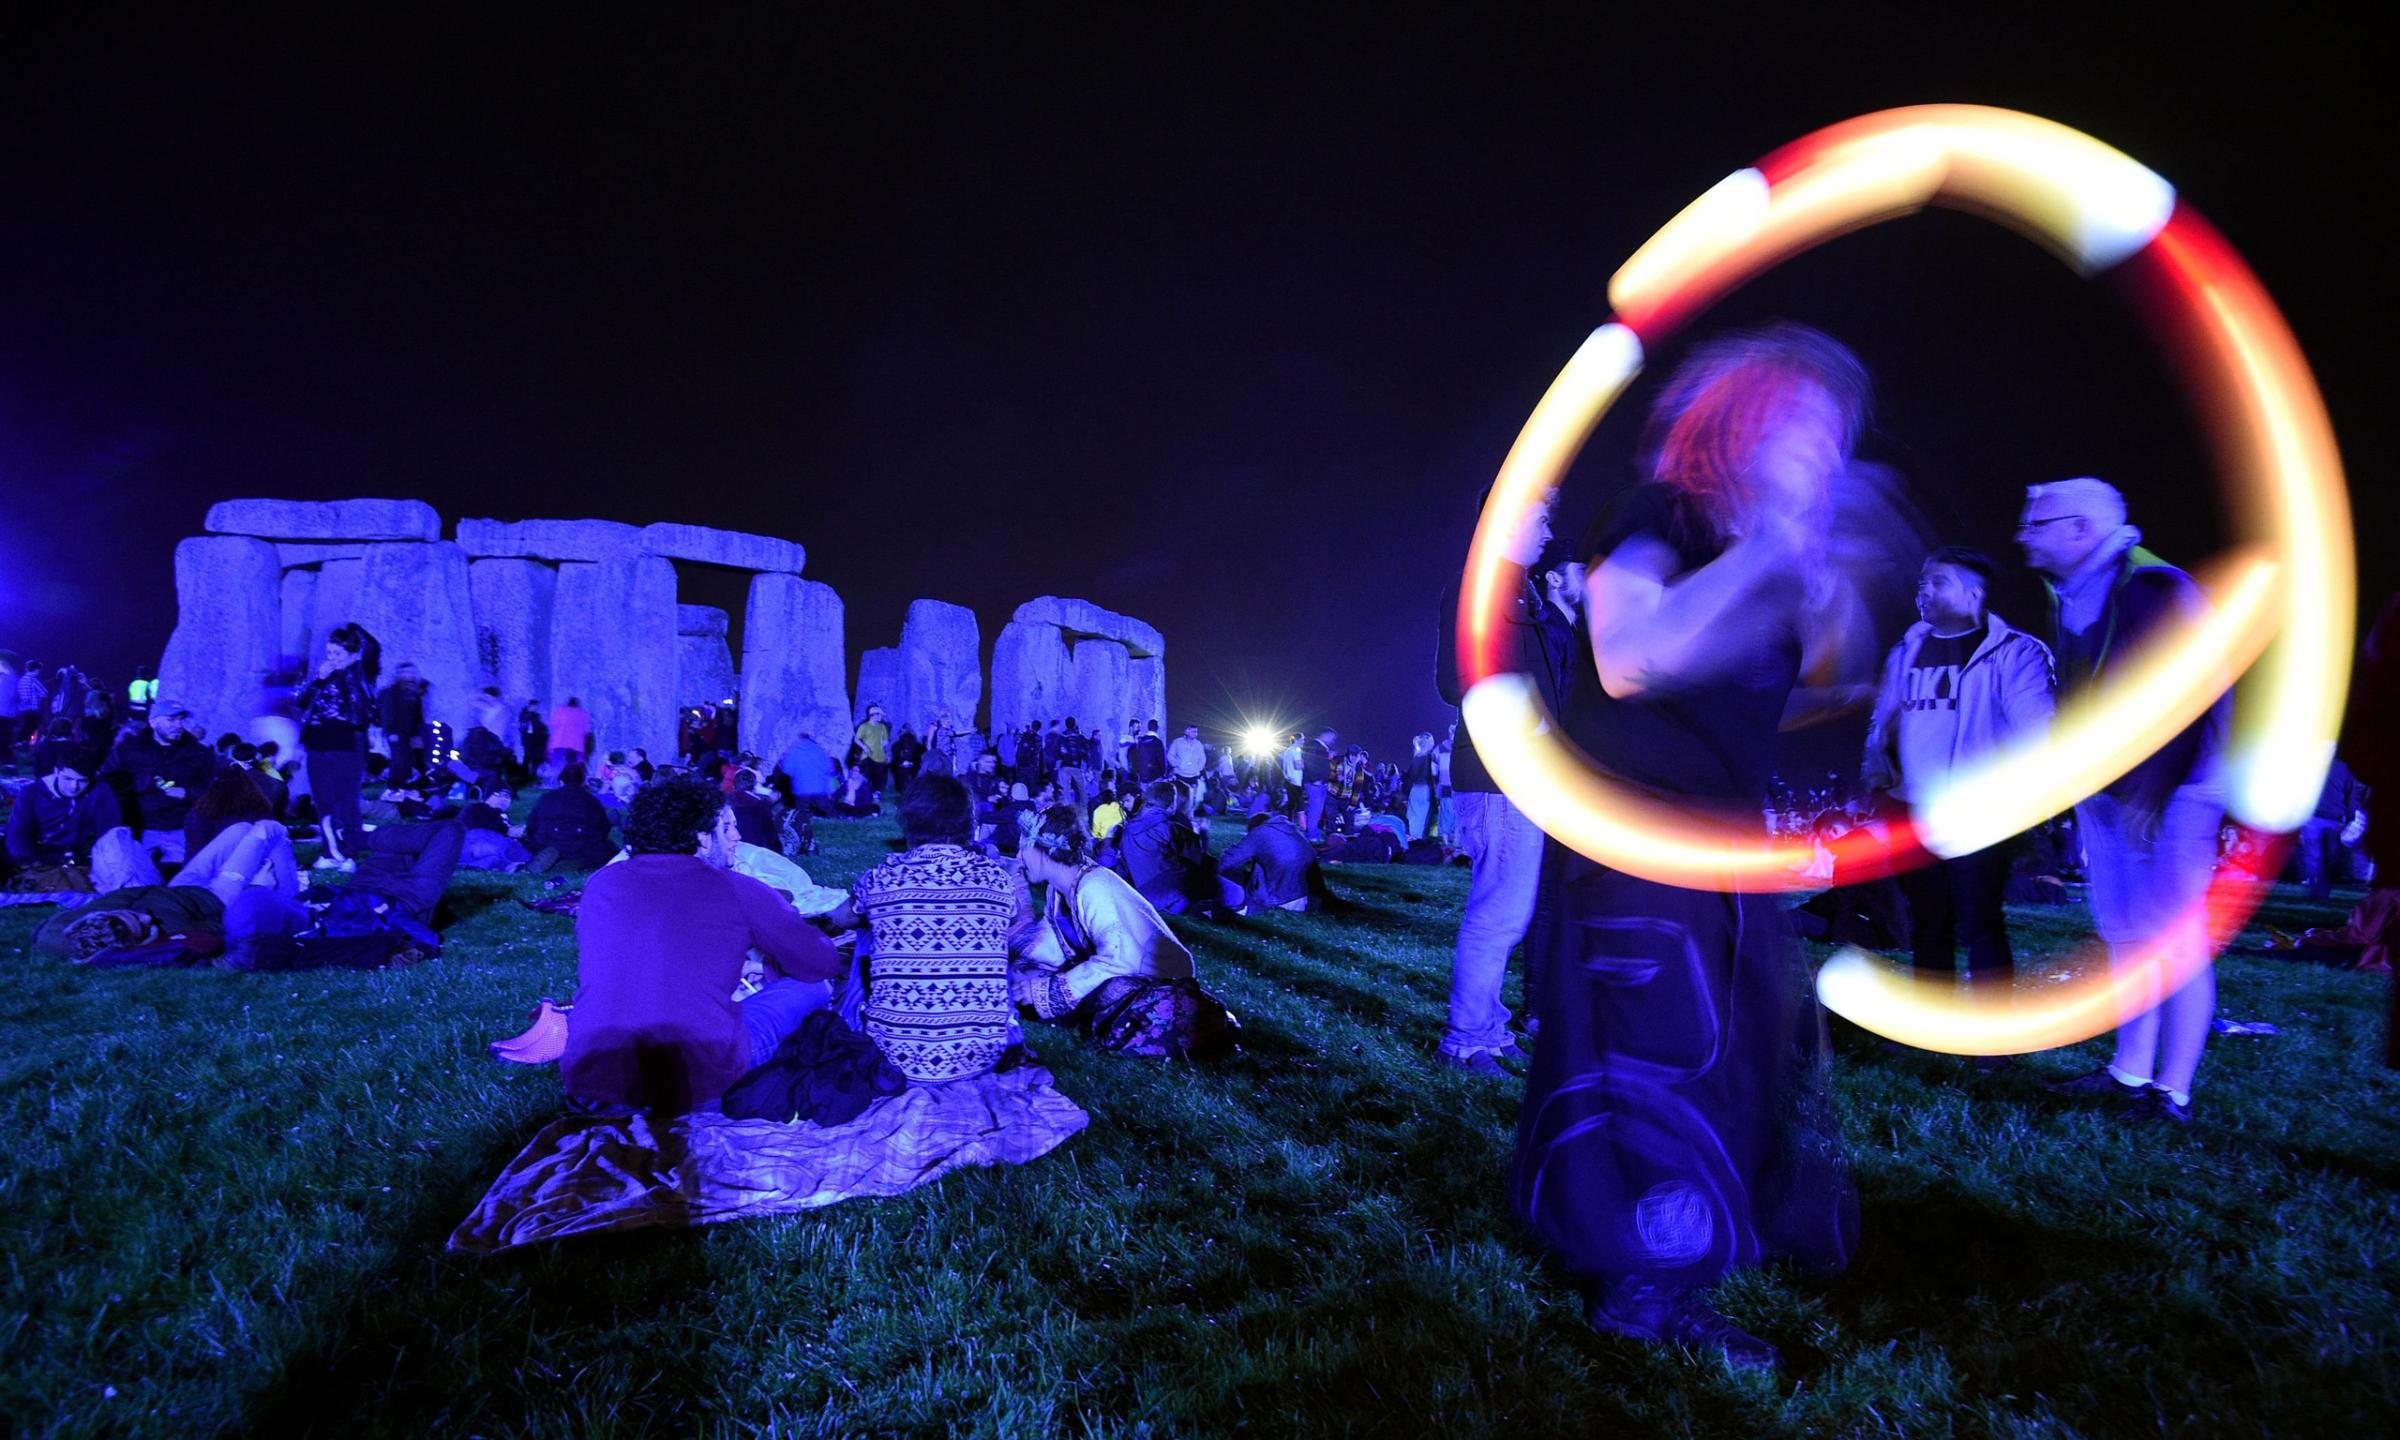 A poi performer spins light balls as people gather at Stonehenge in Wiltshire, England to see in the new dawn after this year's Summer Solstice on June 21, 2016.